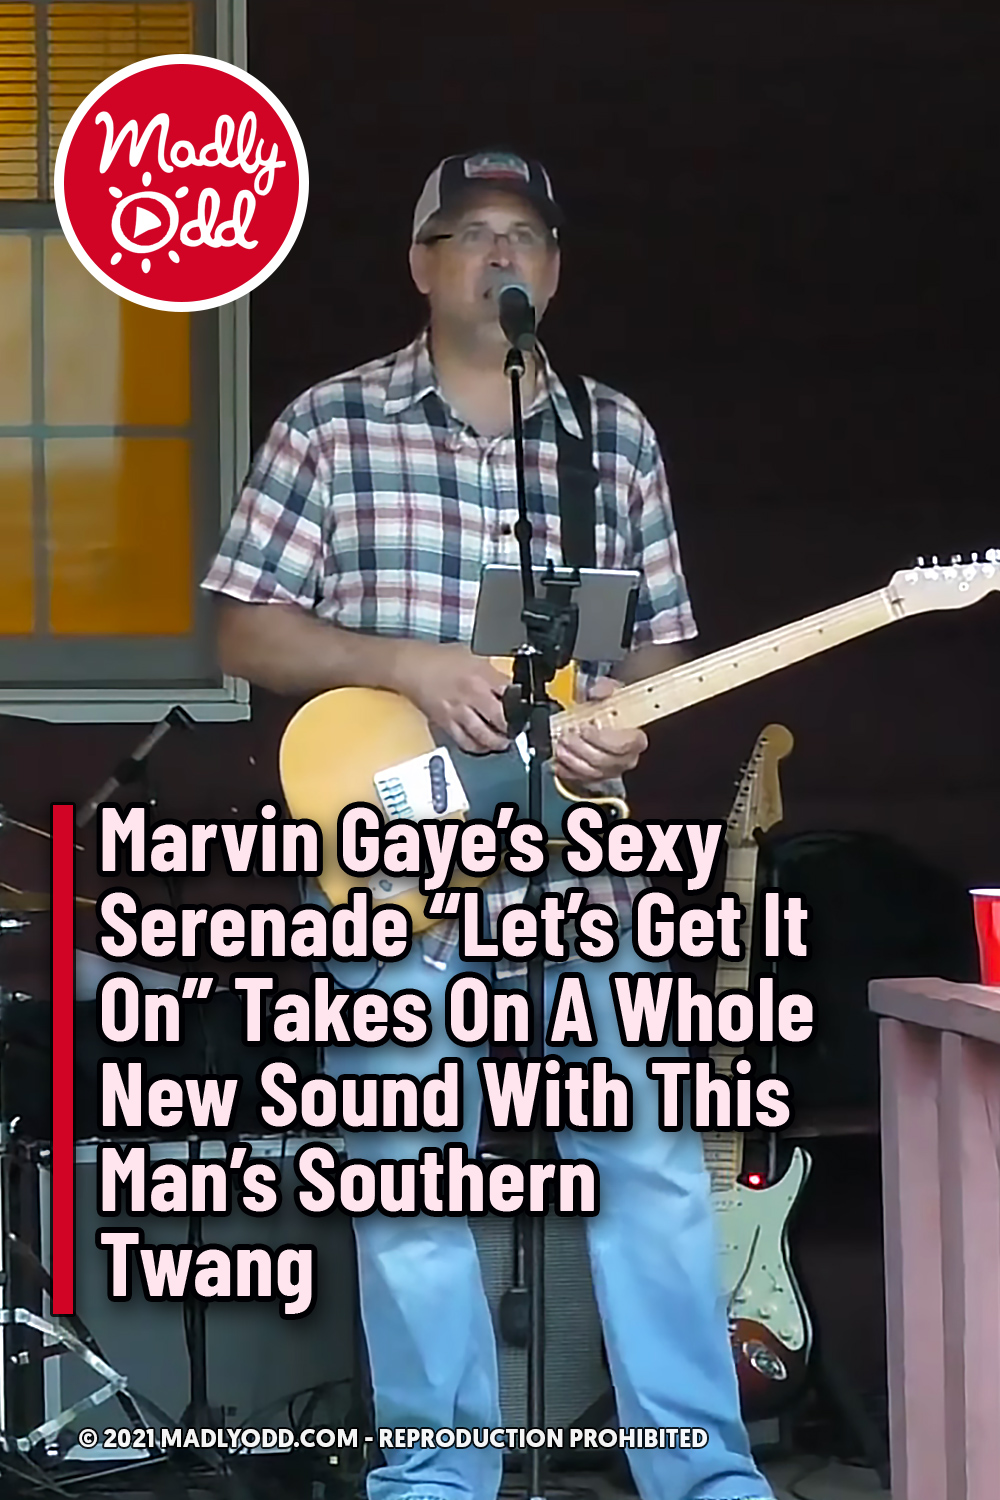 Marvin Gaye’s Sexy Serenade “Let’s Get It On” Takes On A Whole New Sound With This Man’s Southern Twang